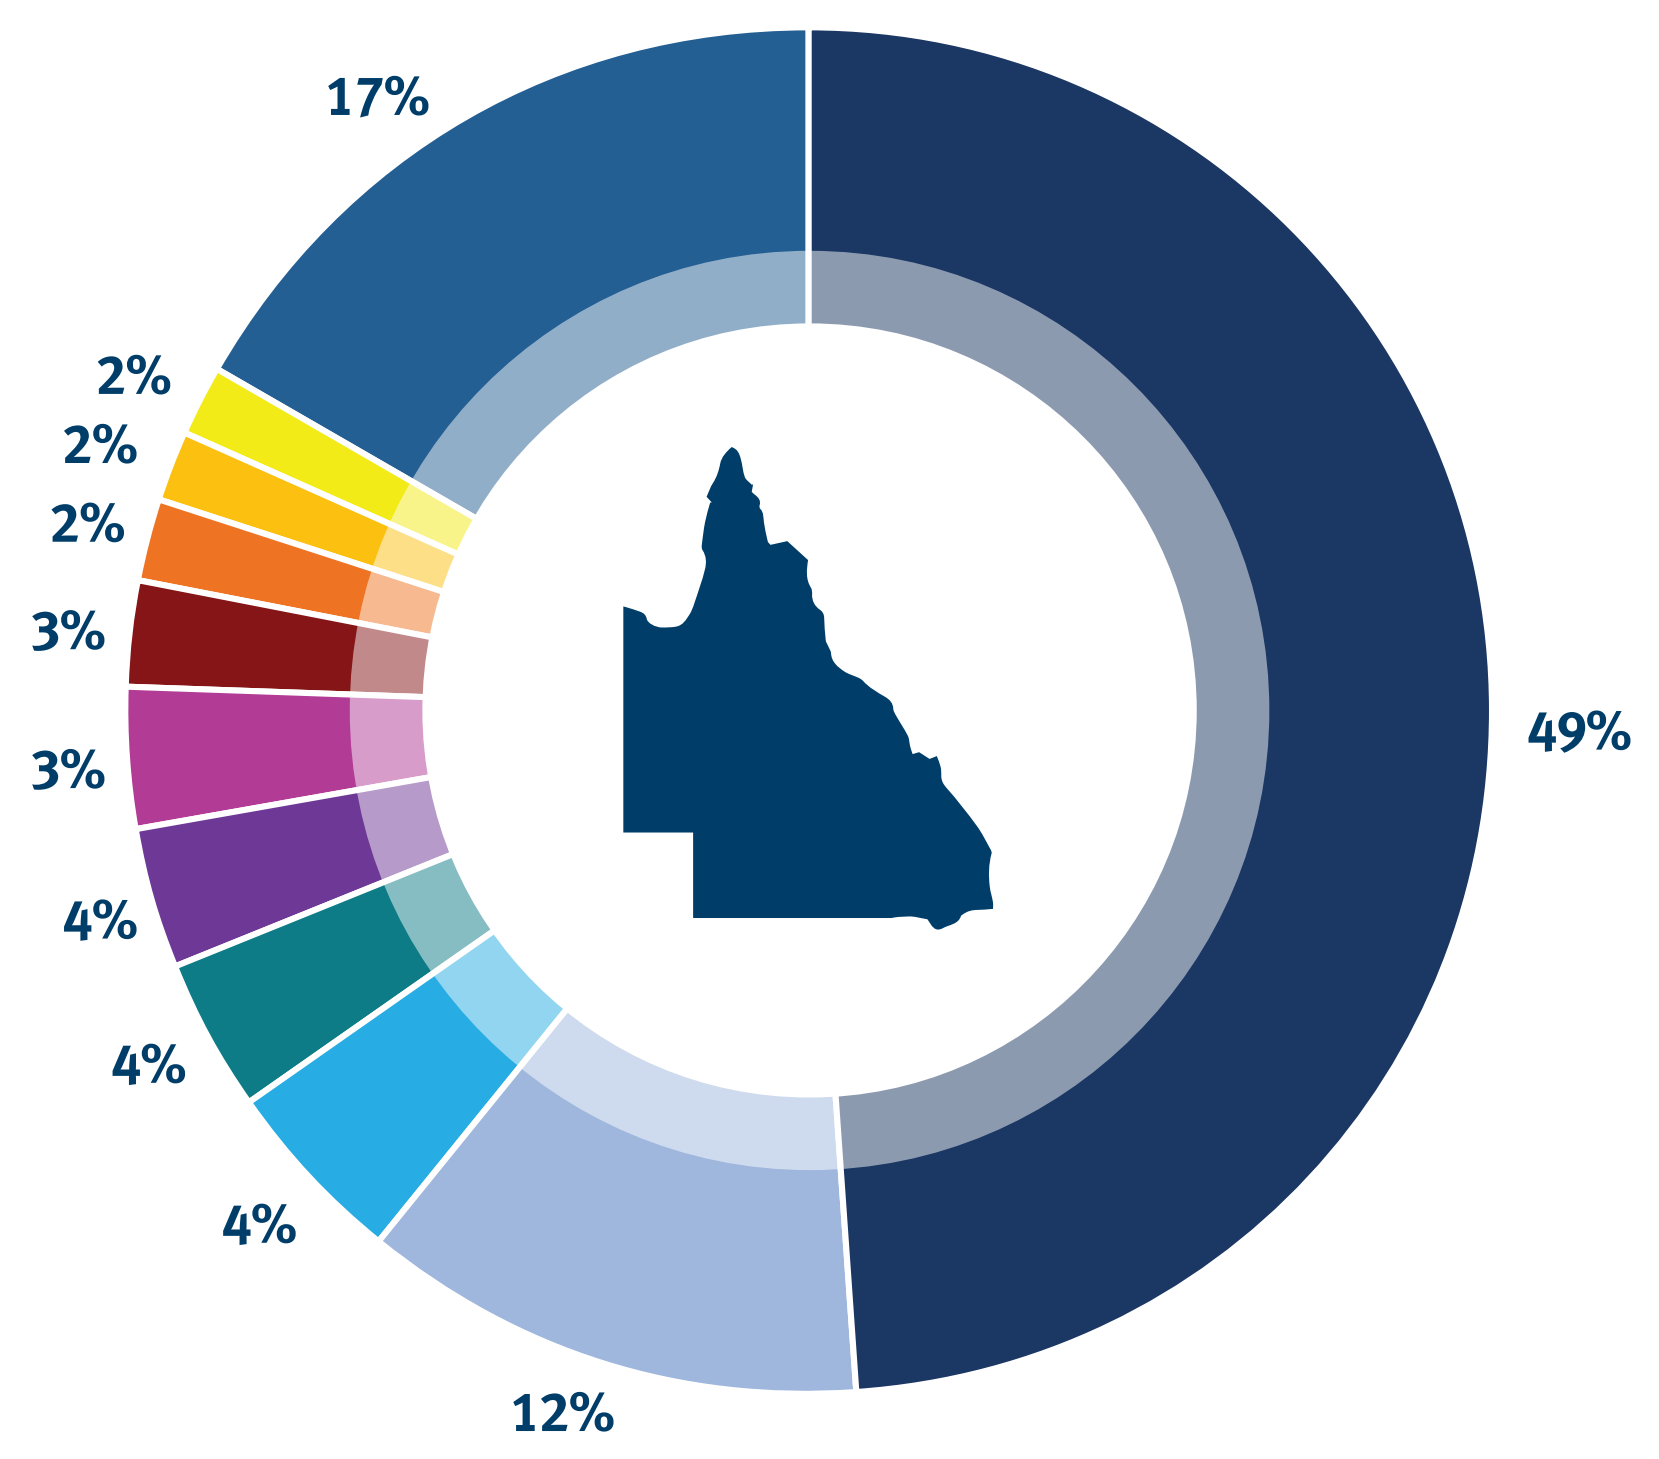 Pie chart showing percentage of different models of battery electric vehicles registered in Queensland as at 31 October 2022.